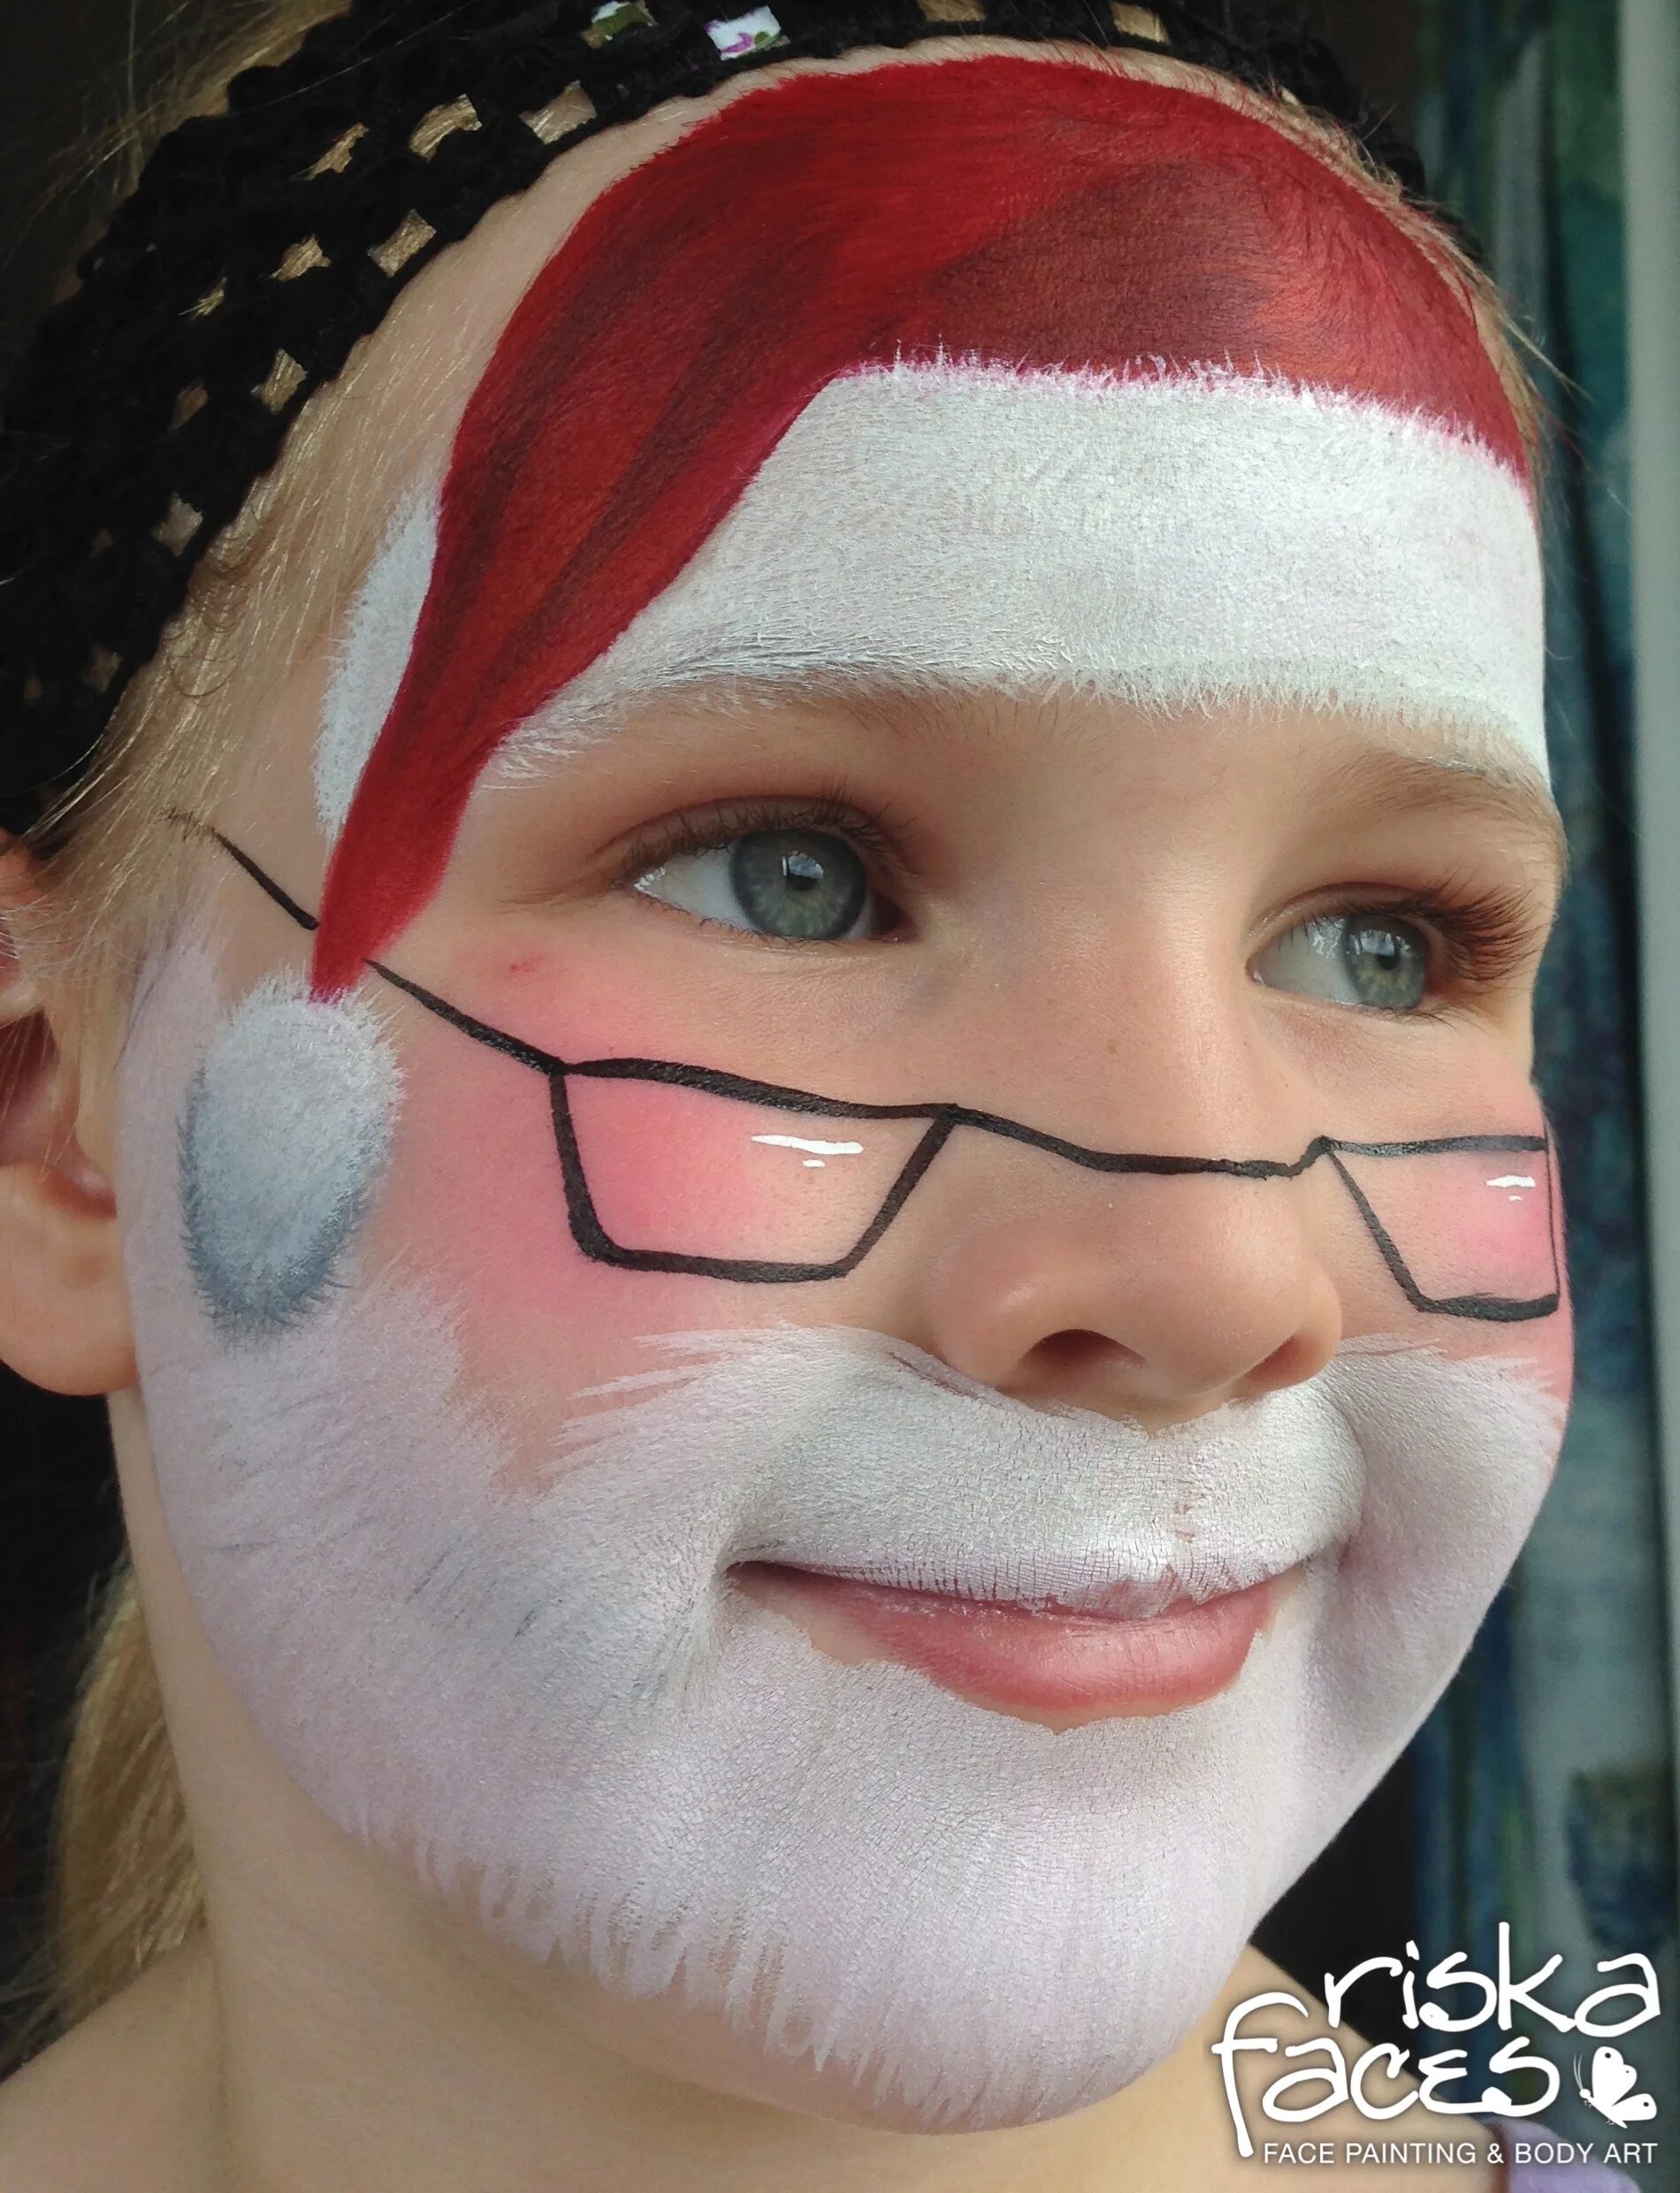 Fancy Christmas face painting